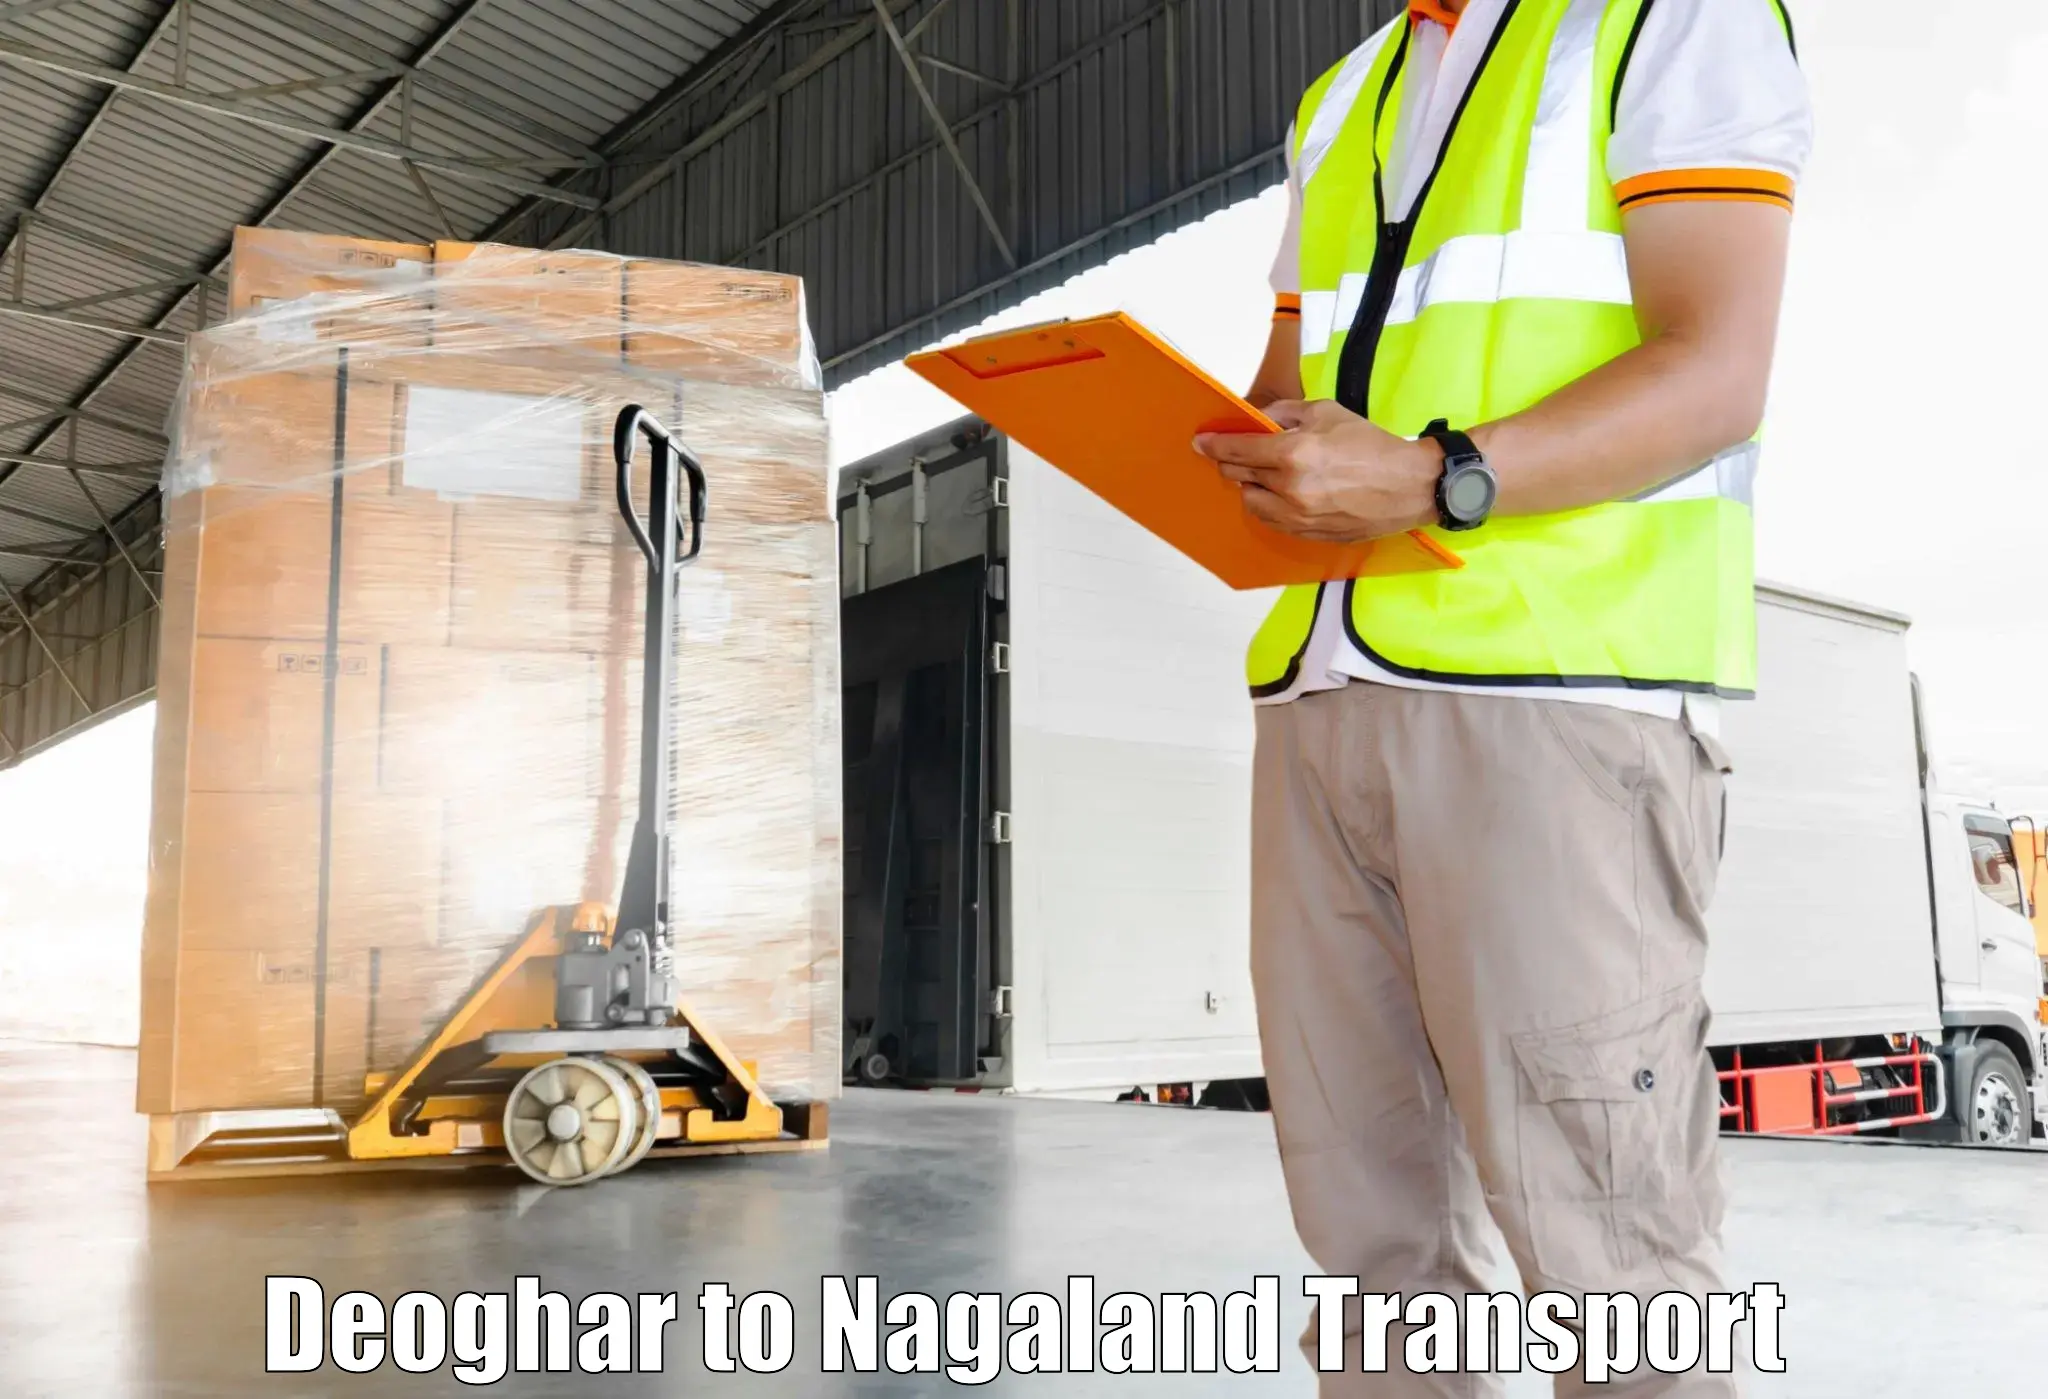 Truck transport companies in India Deoghar to Longleng